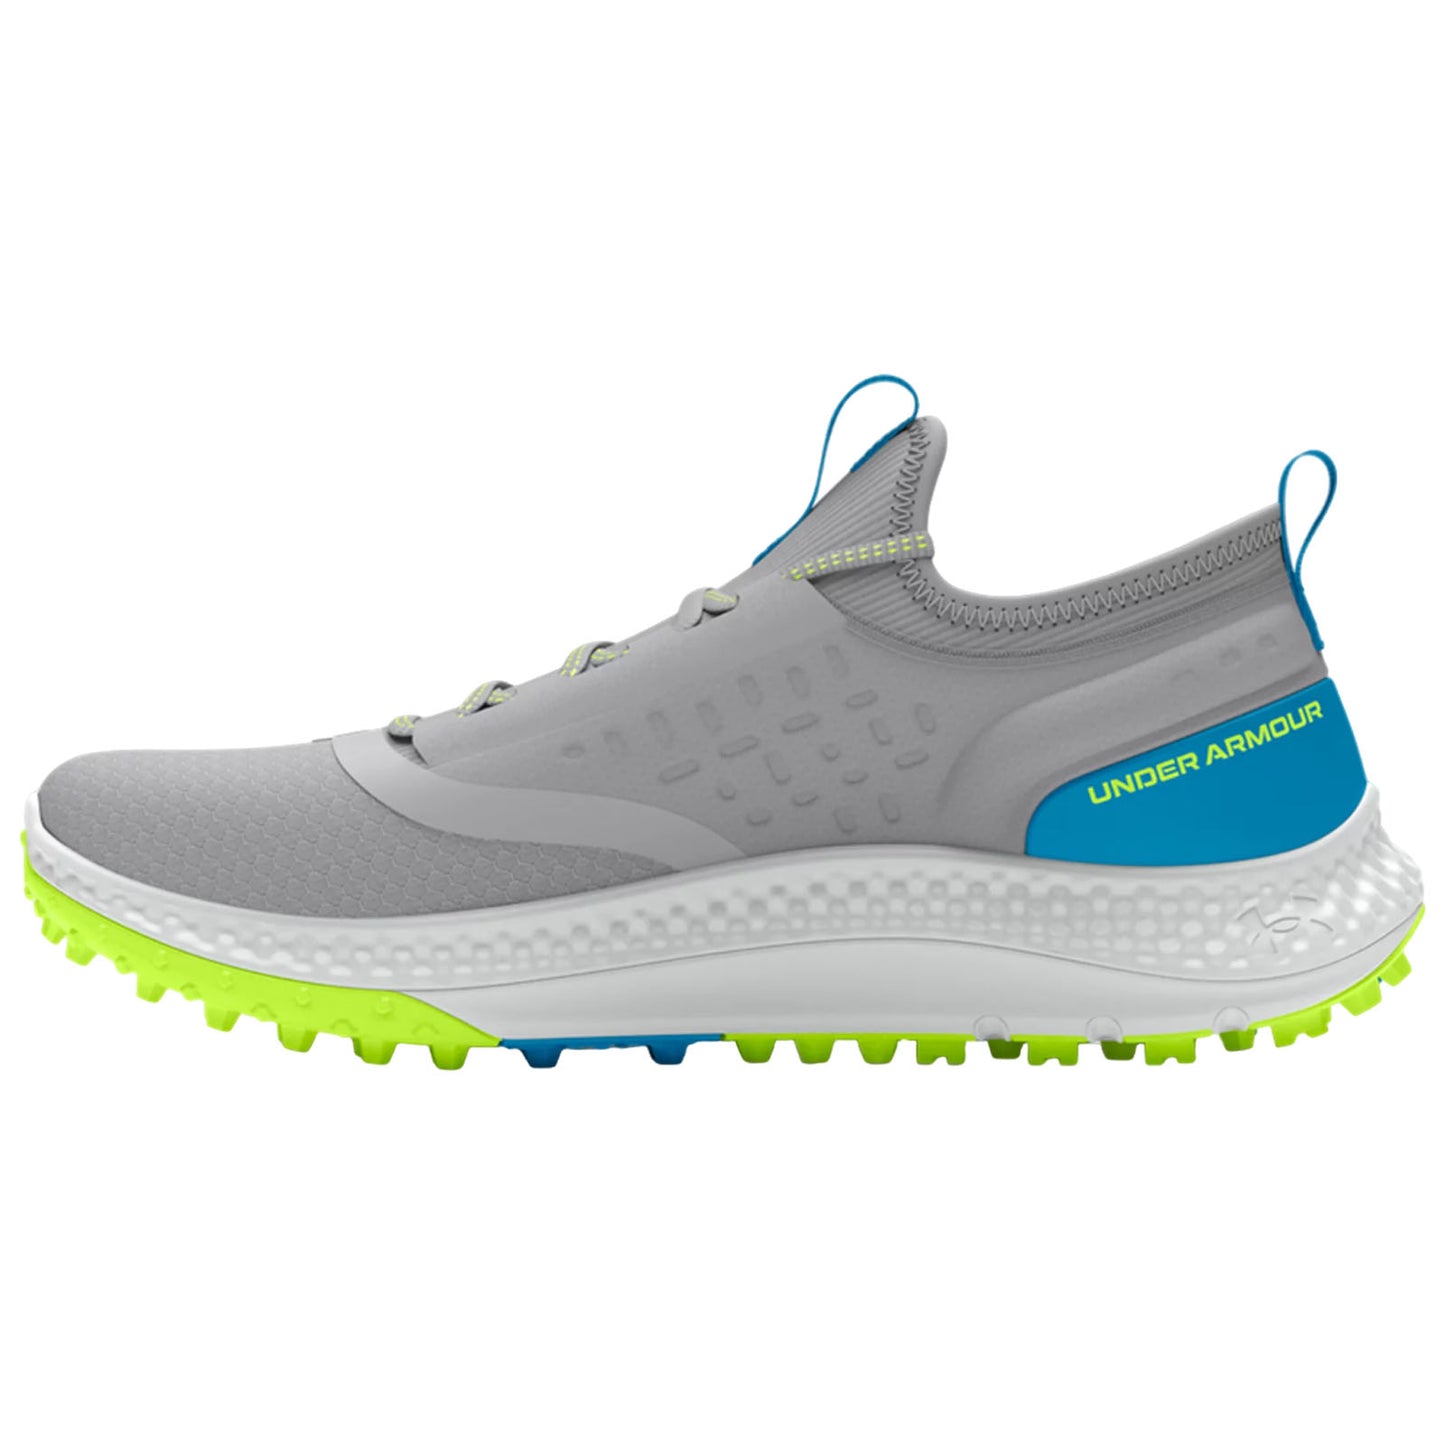 Under Armour Junior Charged Phantom Golf Shoes